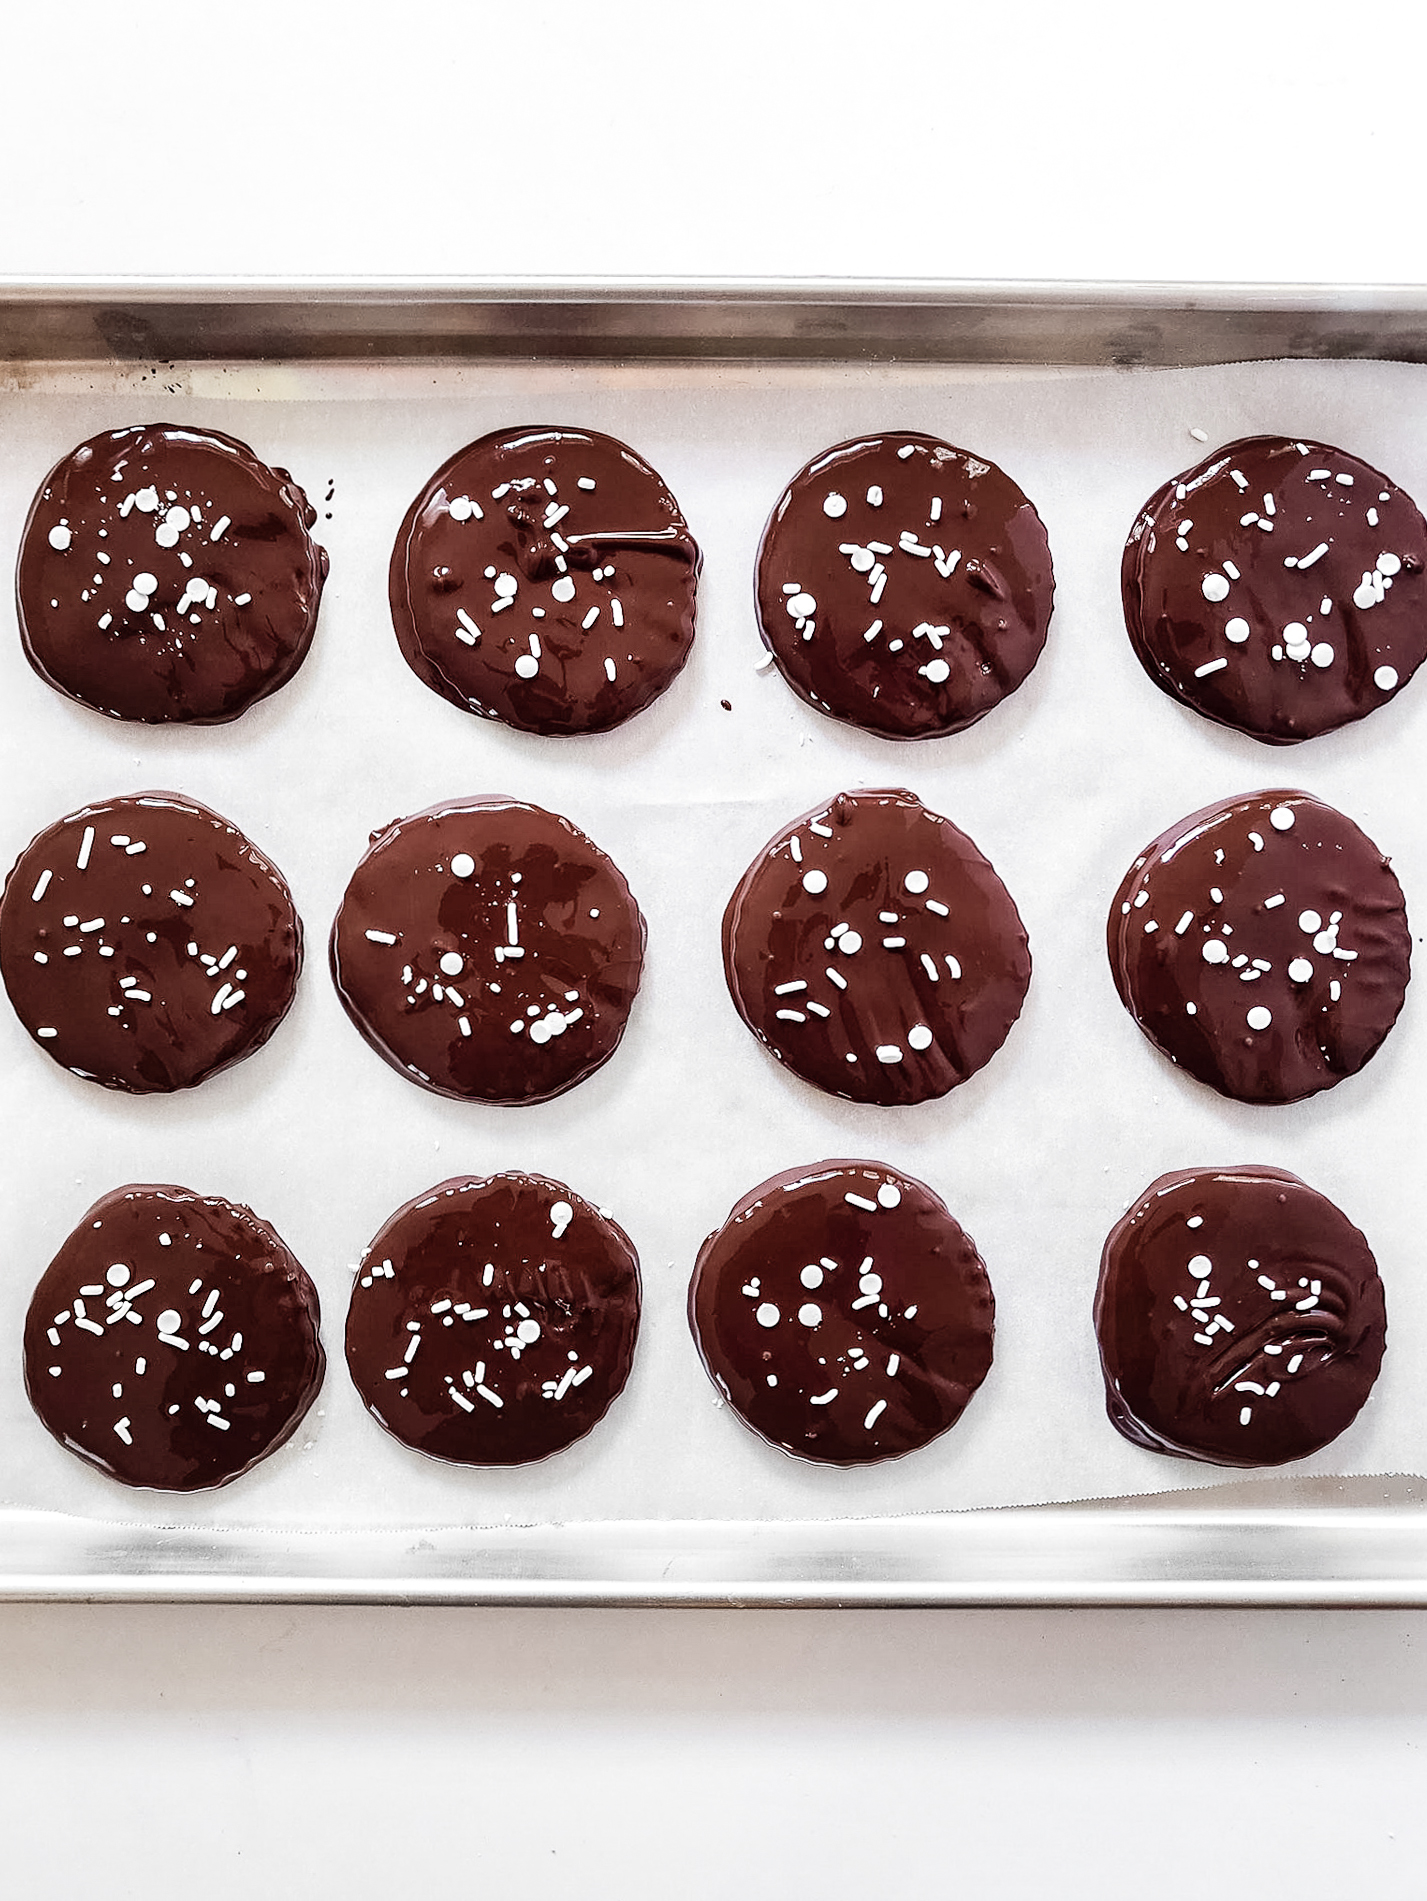 Dark chocolate peppermint patties on parchment-lined baking sheet.